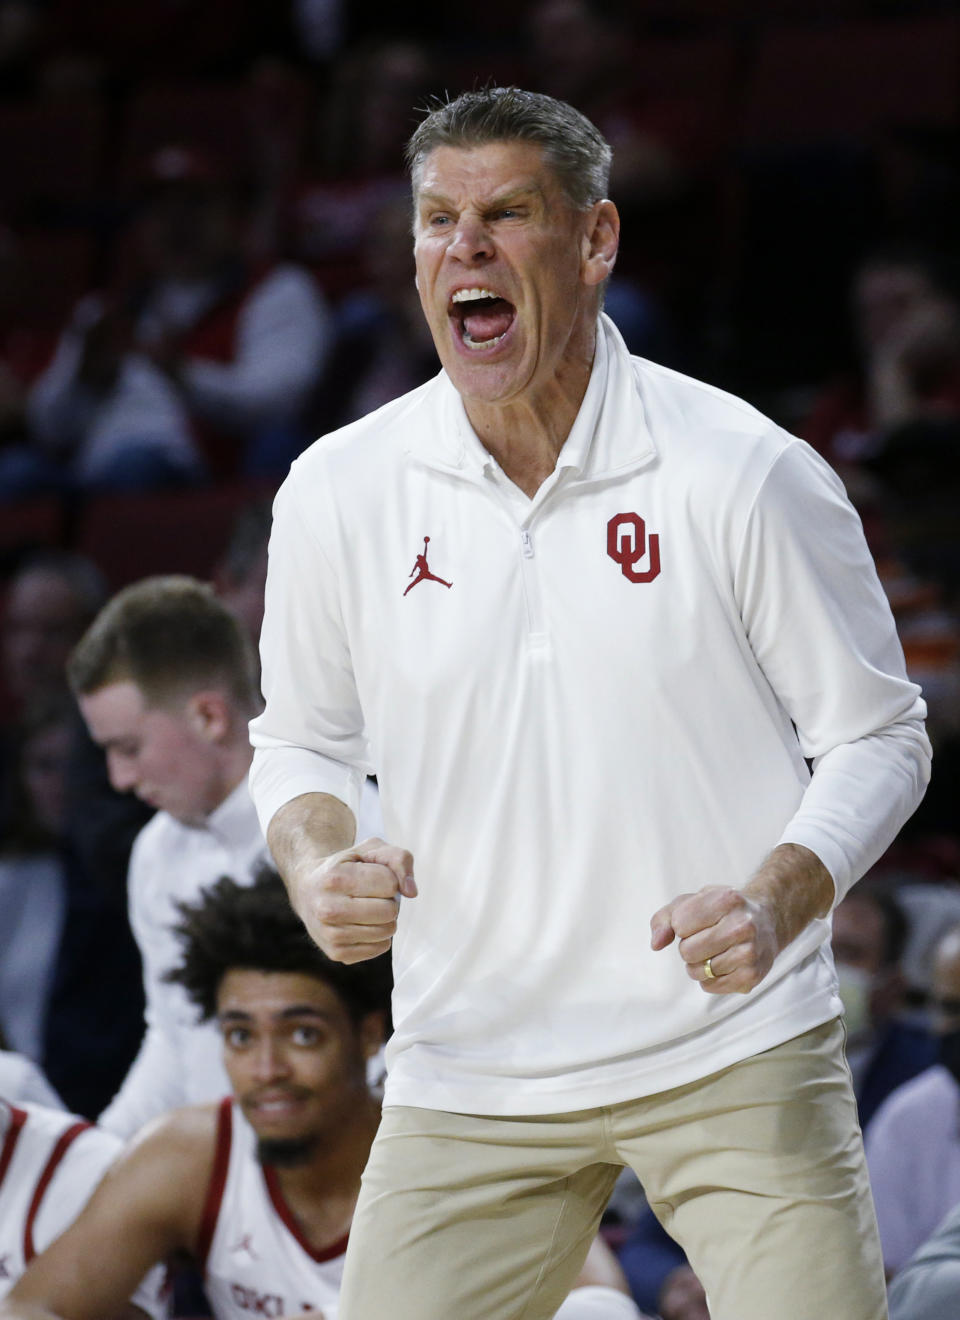 Oklahoma coach Porter Moser yells during the first half of the team's NCAA college basketball game against Texas Tech on Wednesday, Feb. 9, 2022, in Norman, Okla. (AP Photo/Garett Fisbeck)